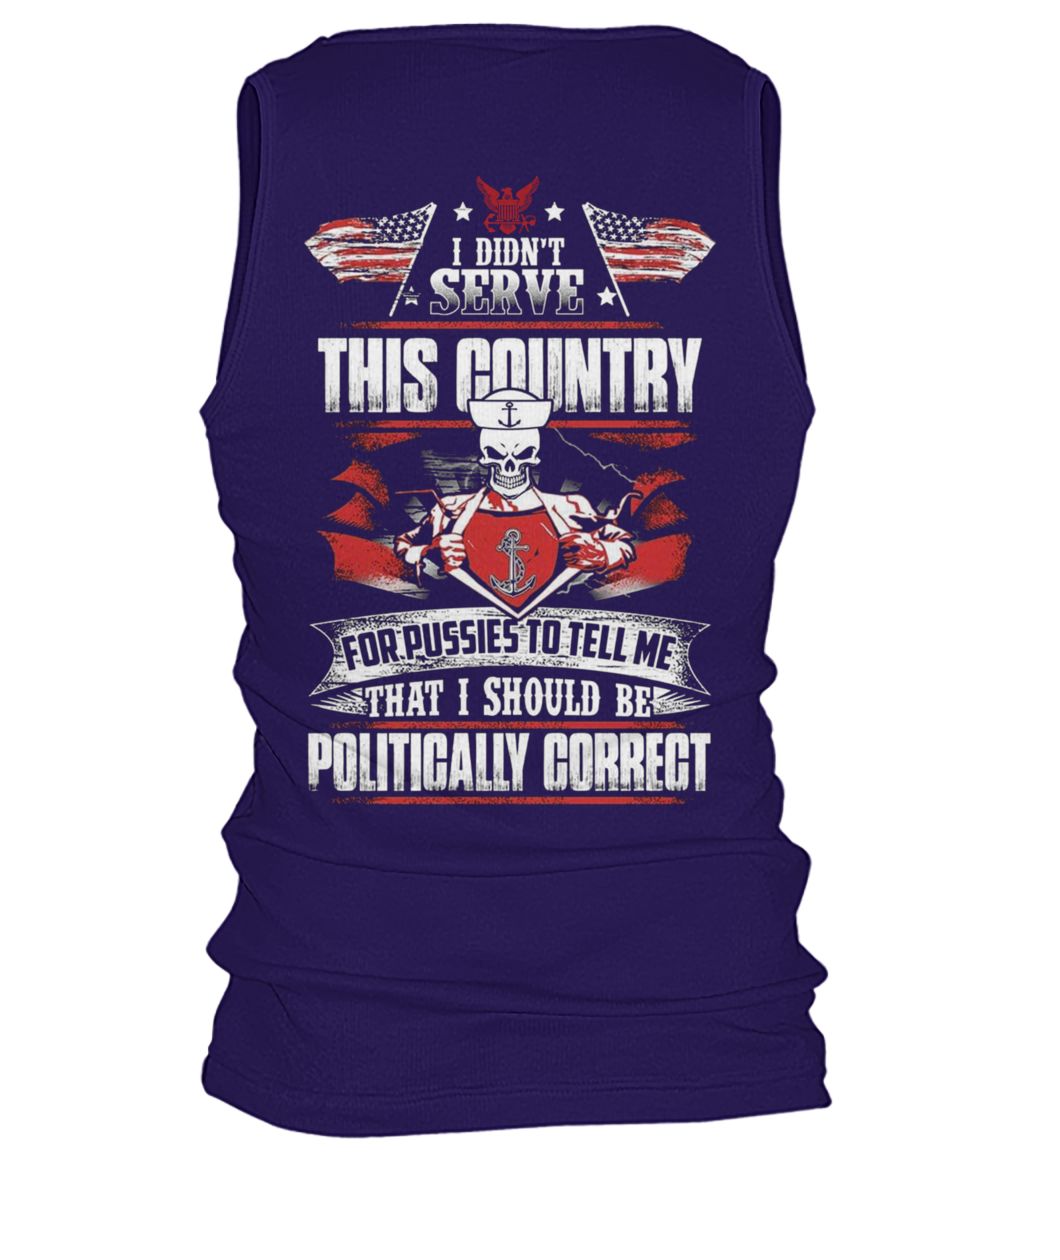 I didn't serve this country for pussies to tell me that I should be politically correct navy veteran men's tank top